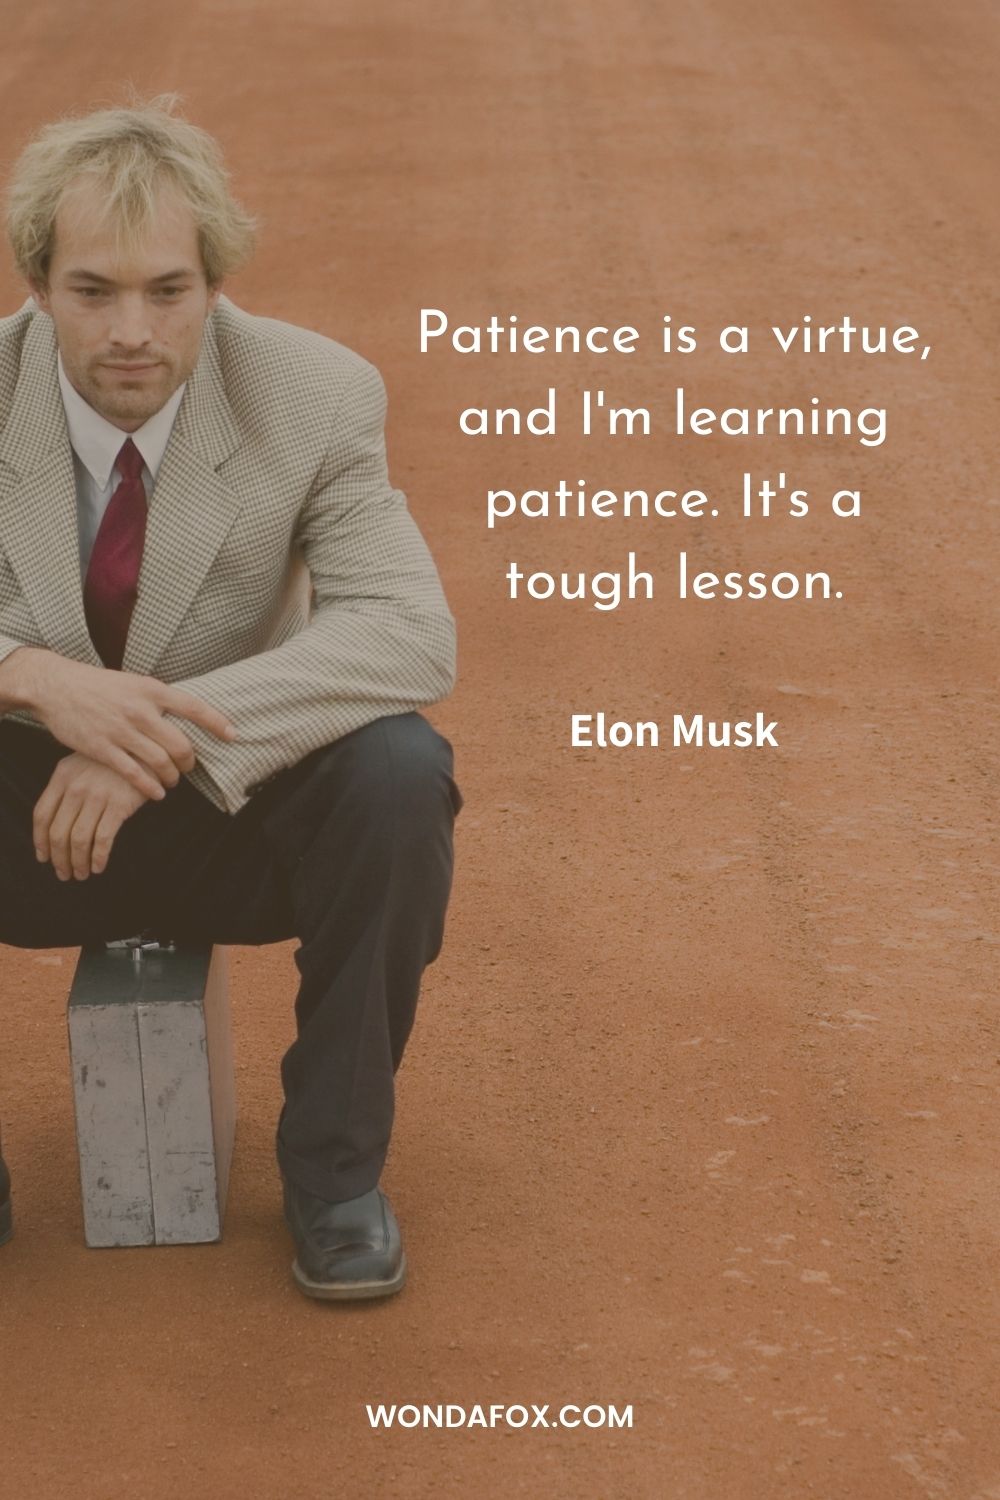 Patience is a virtue, and I'm learning patience. It's a tough lesson.